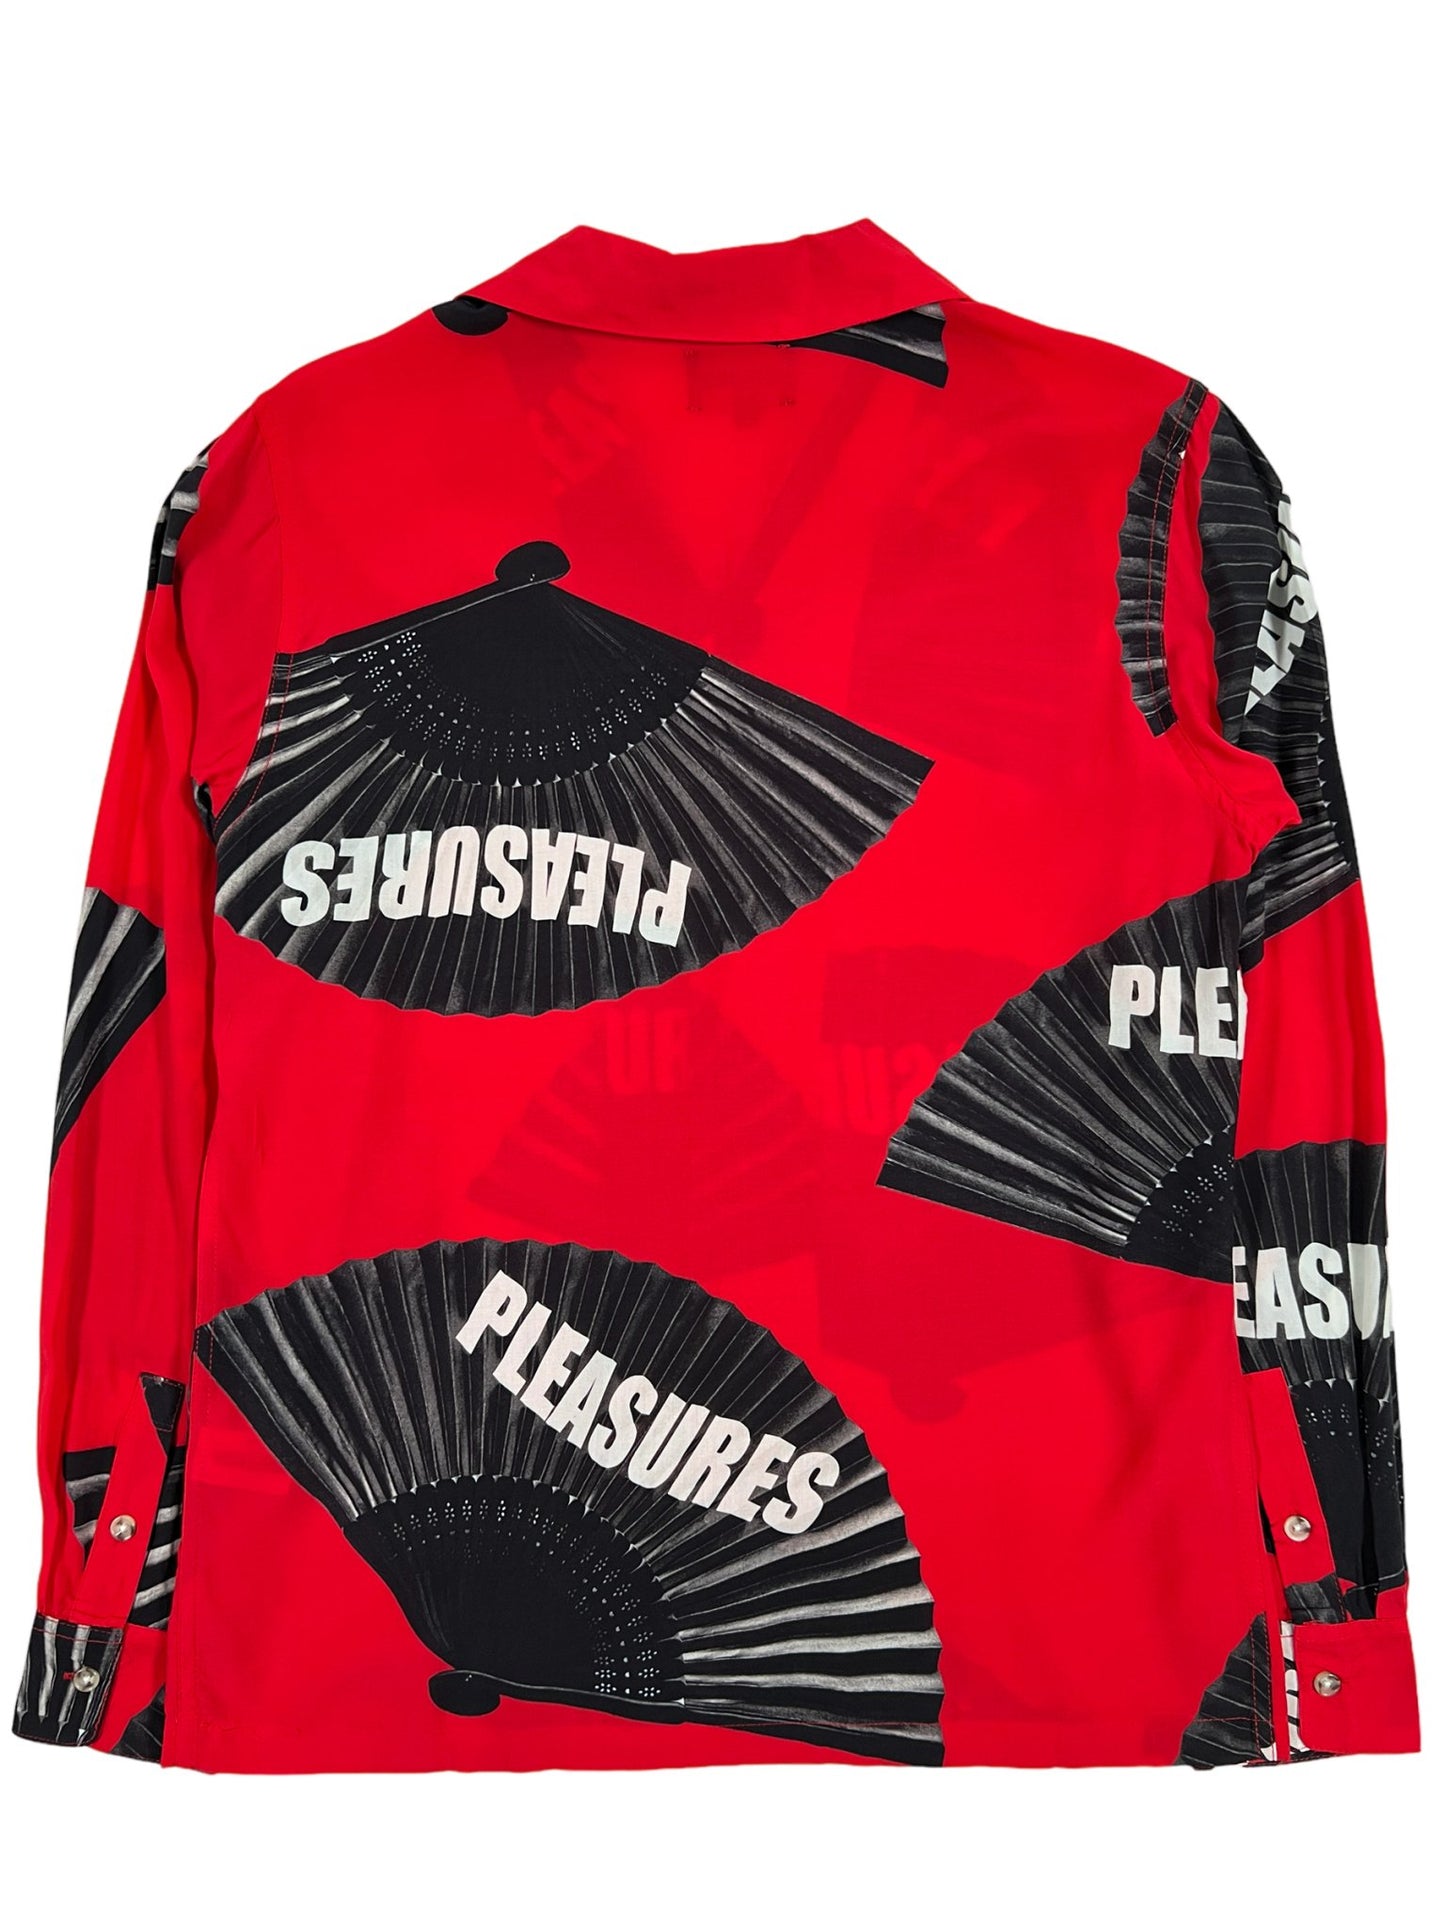 A PLEASURES red long sleeve button-down shirt that says pleasures on it.